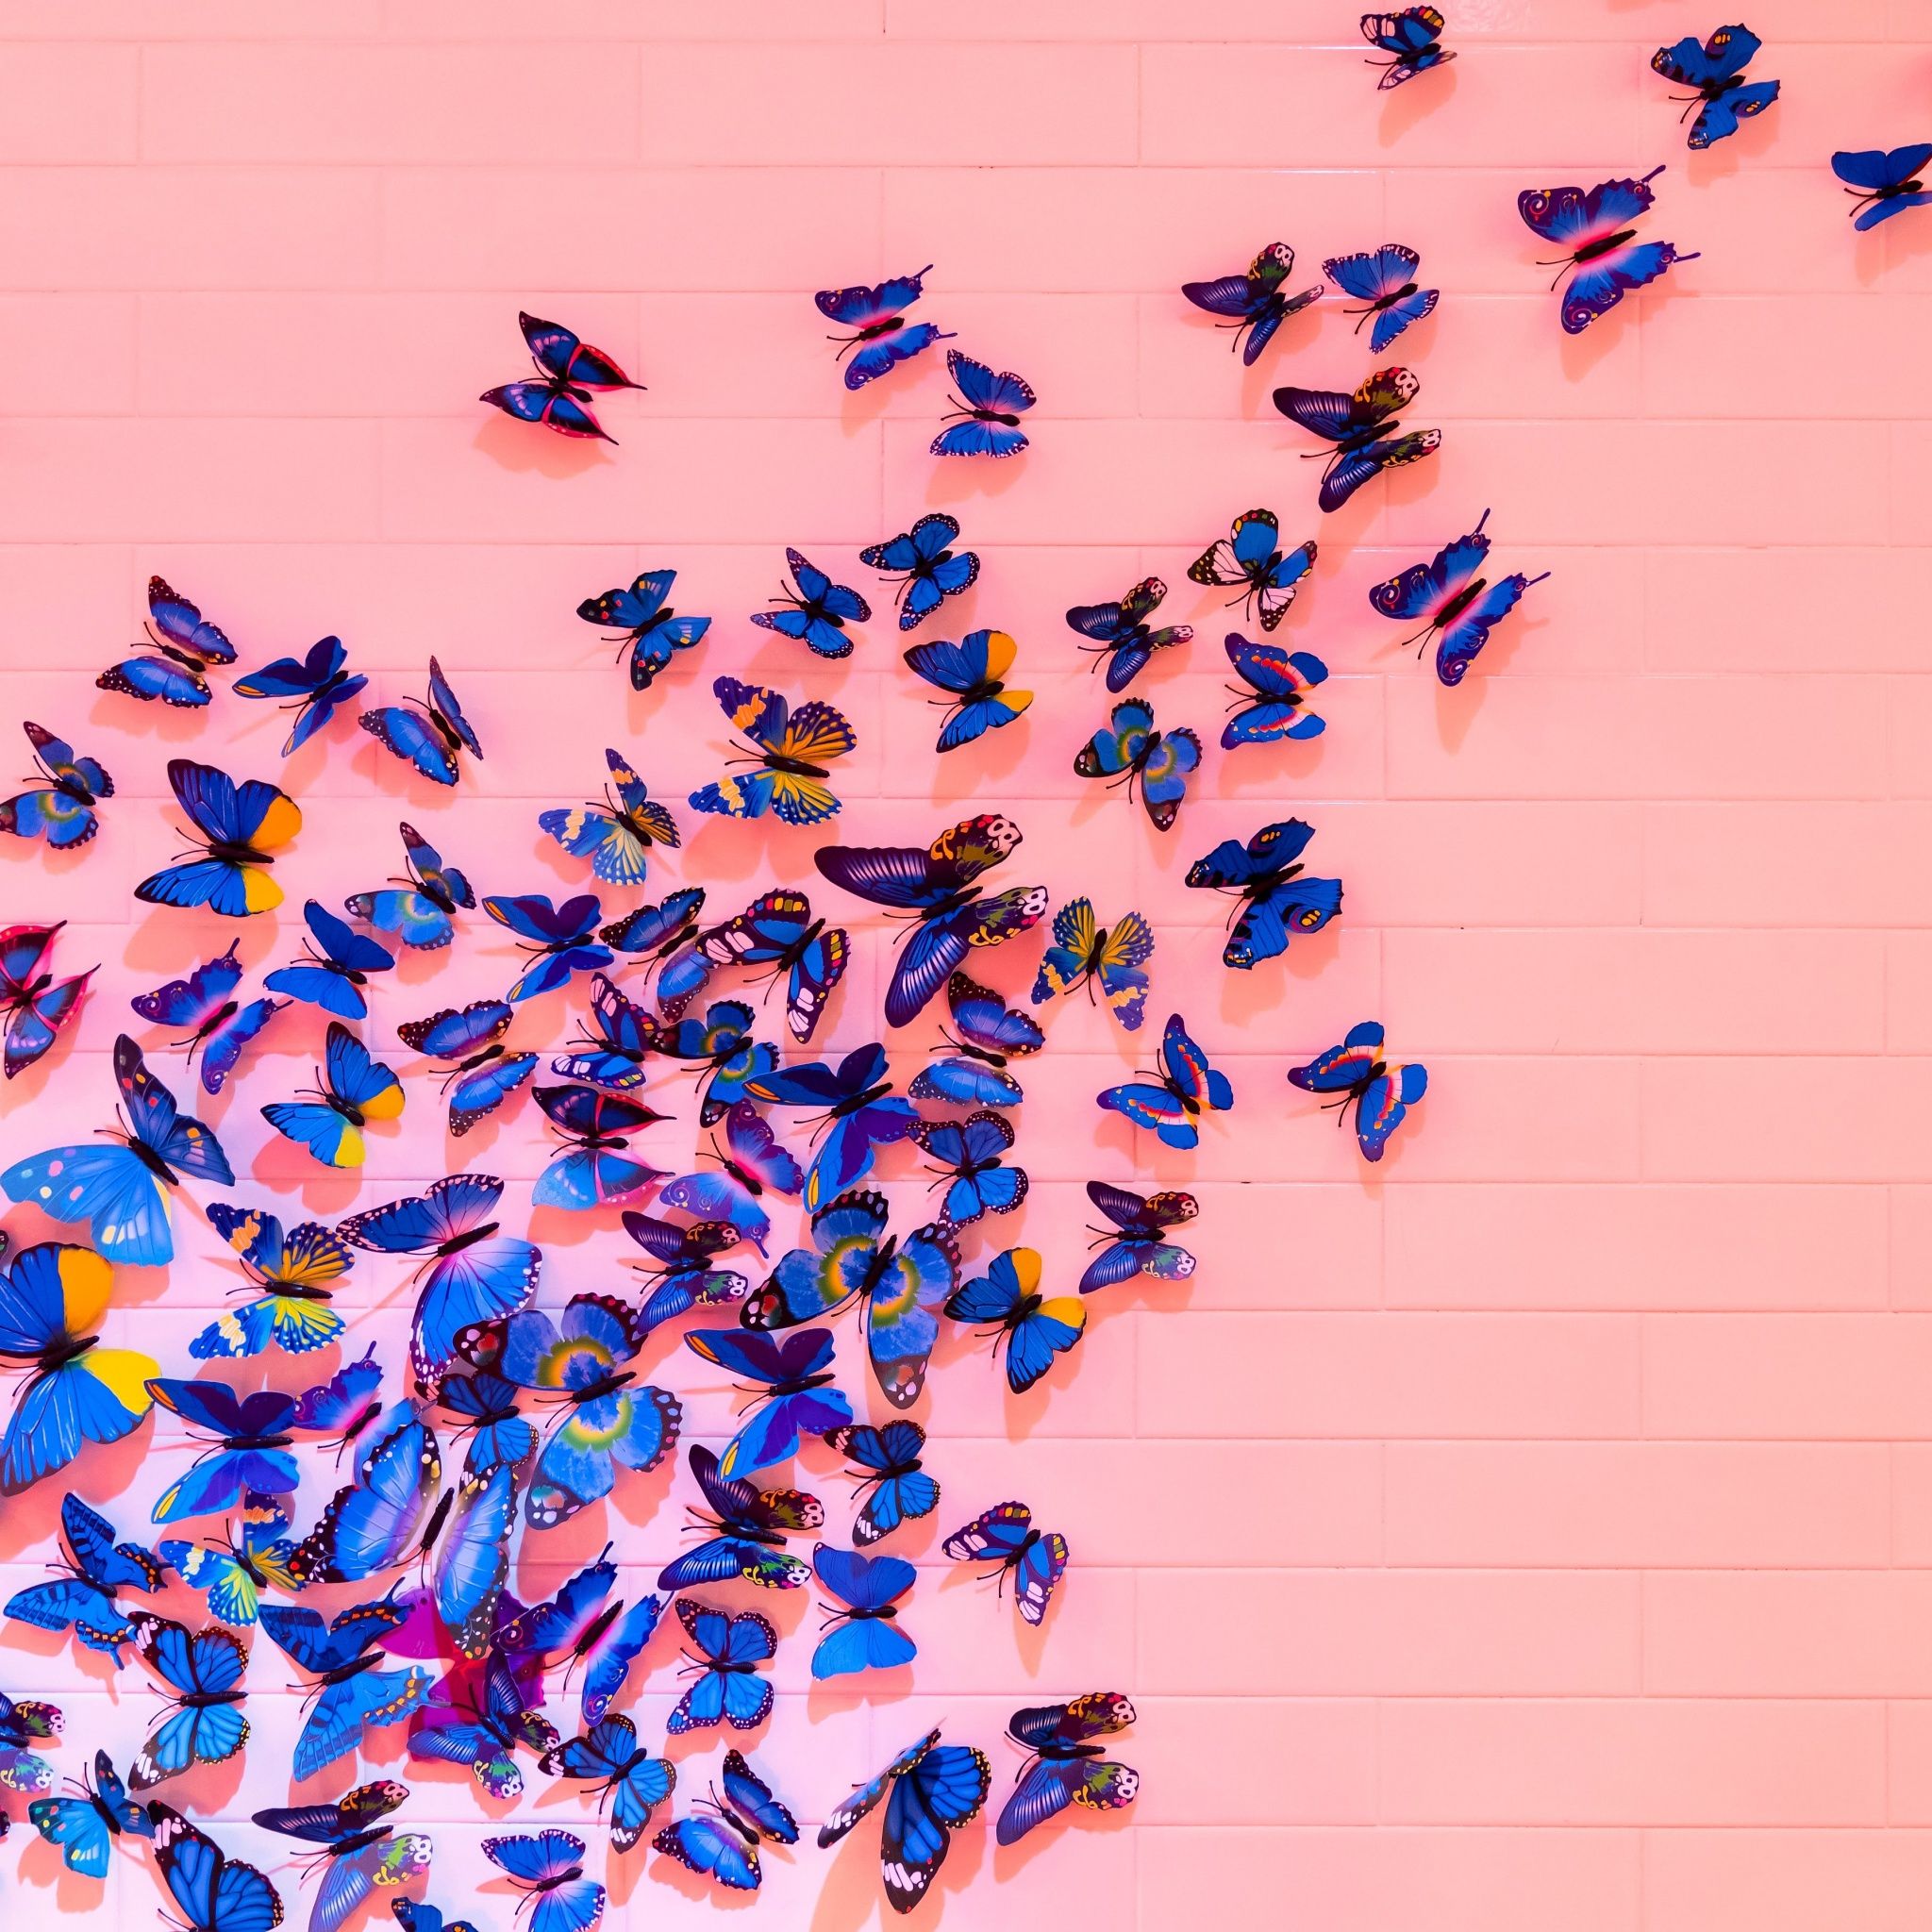 A wall of blue butterflies against a pink background - Butterfly